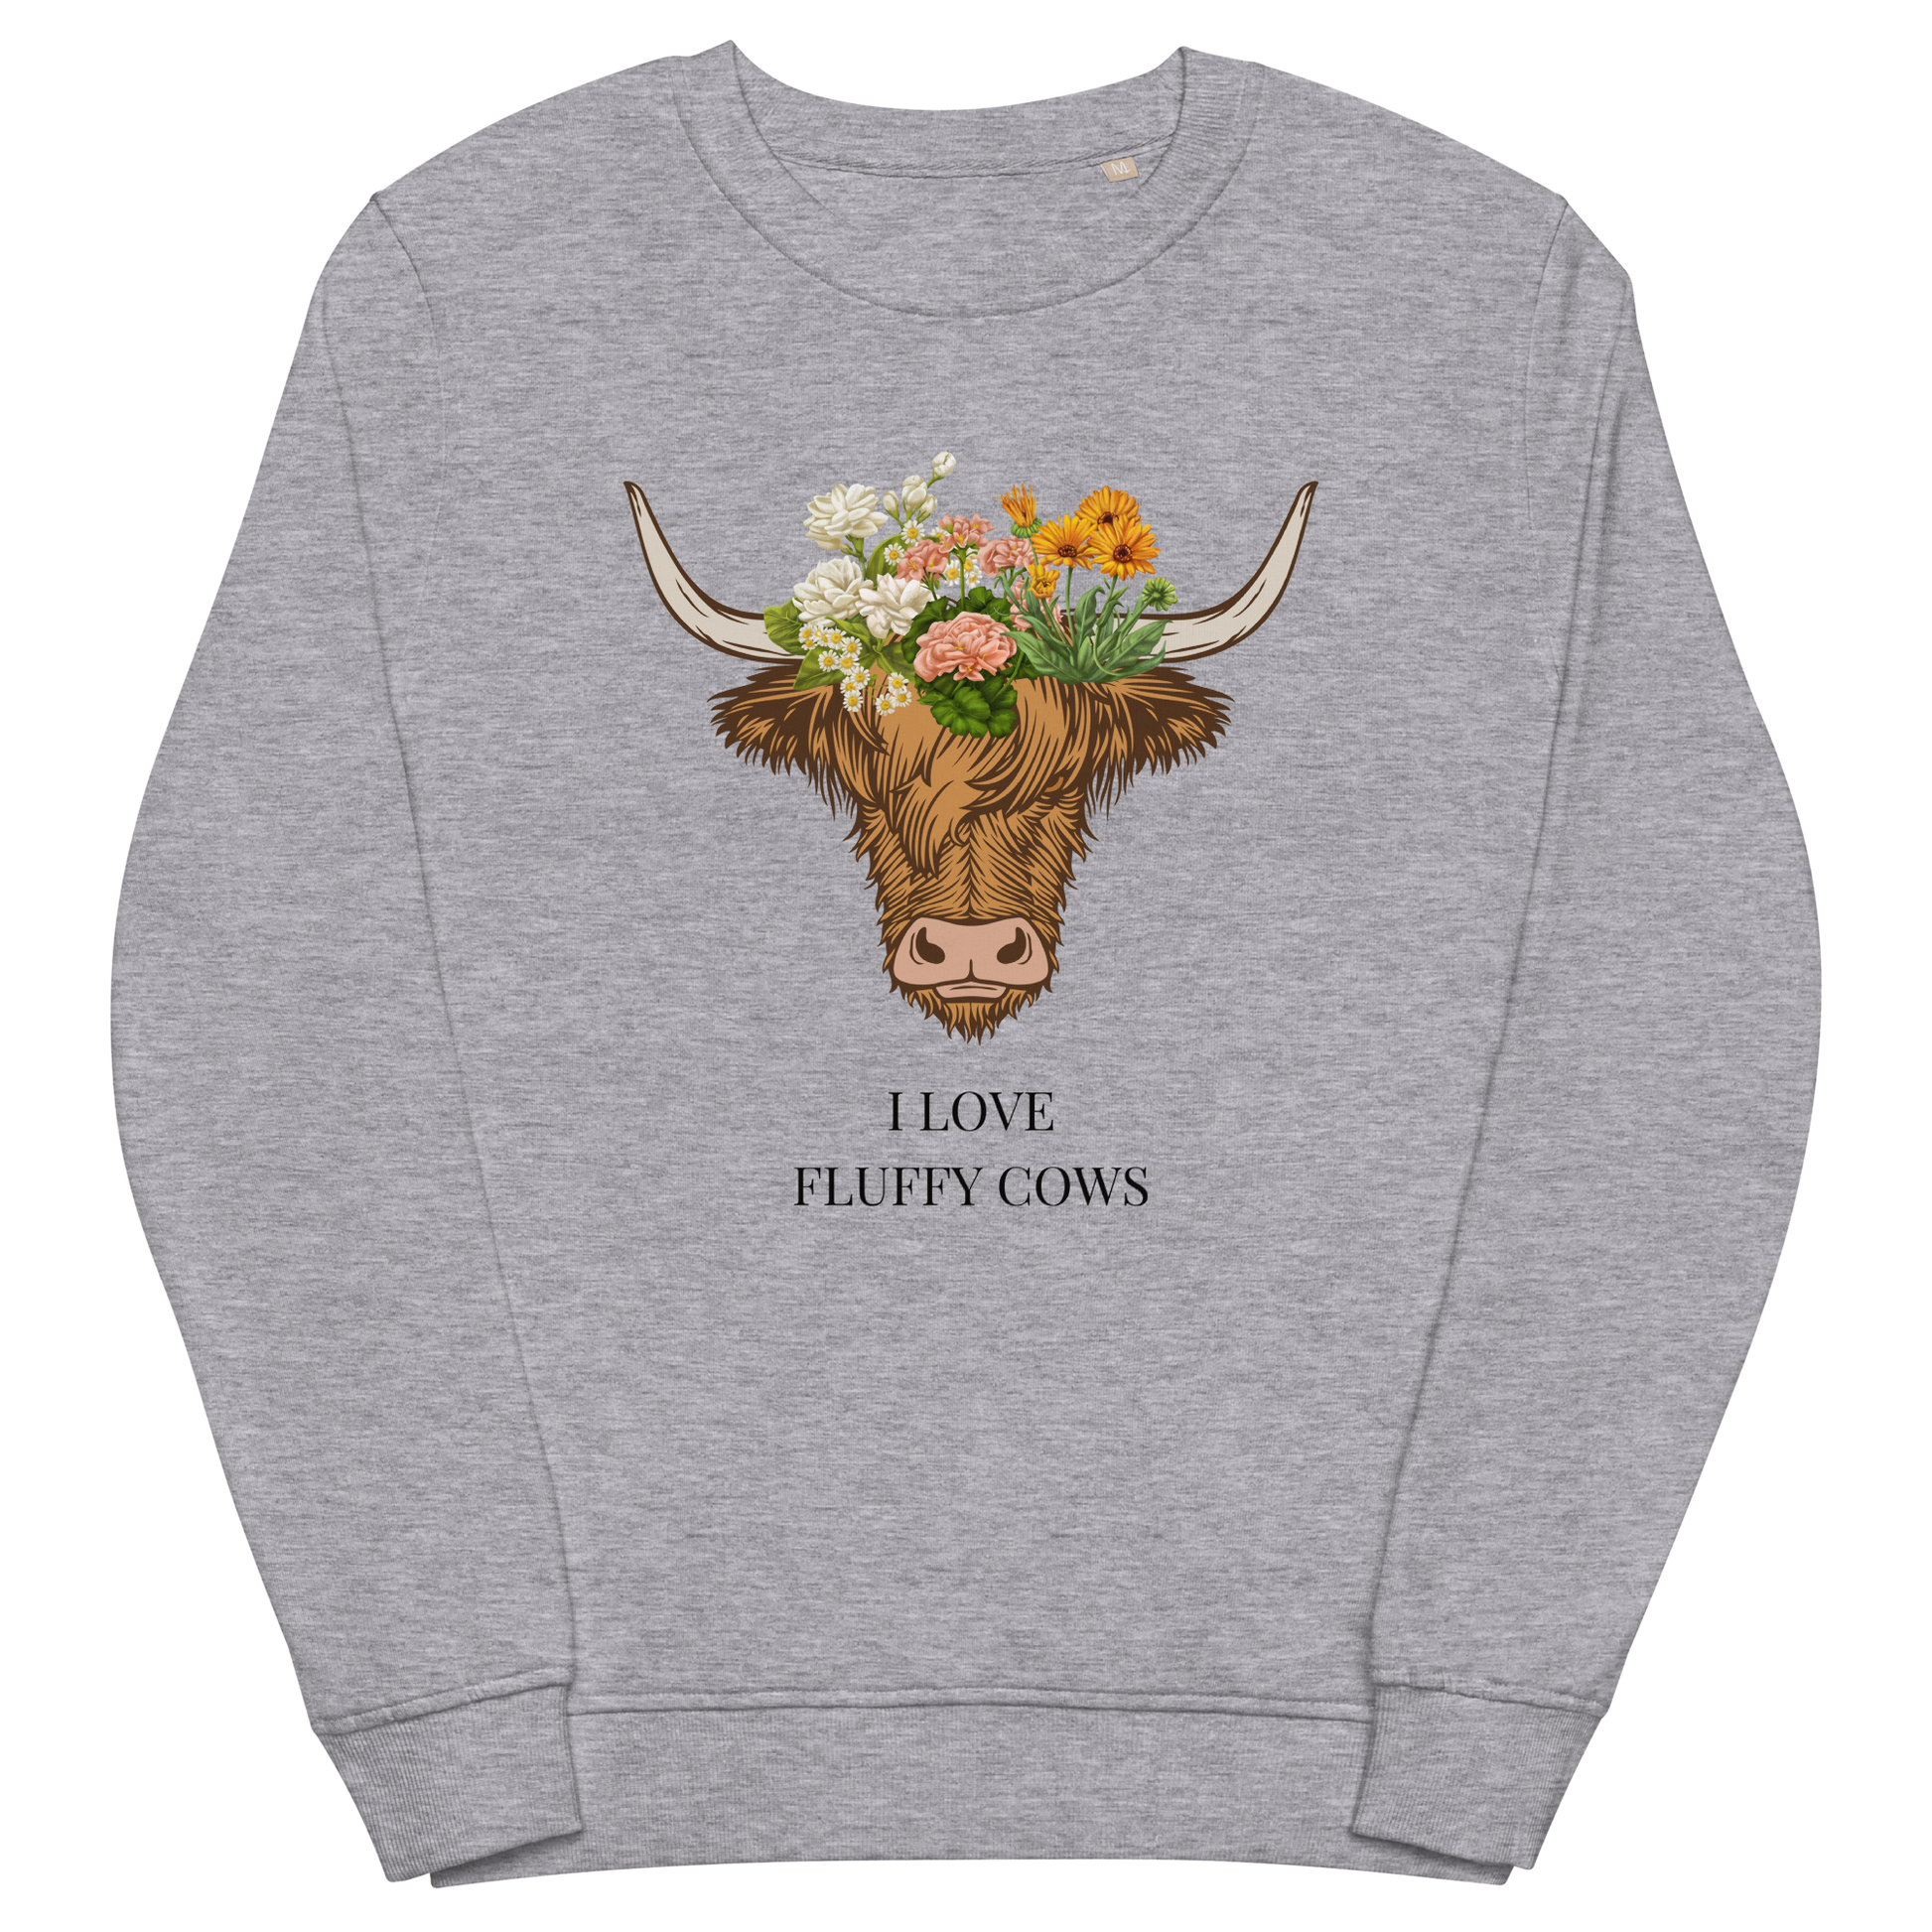 Grey Melange Organic Cotton Highland Cow Sweatshirt featuring an adorable I Love Fluffy Cows graphic on the chest - Cute Graphic Highland Cow Sweatshirts - Boozy Fox